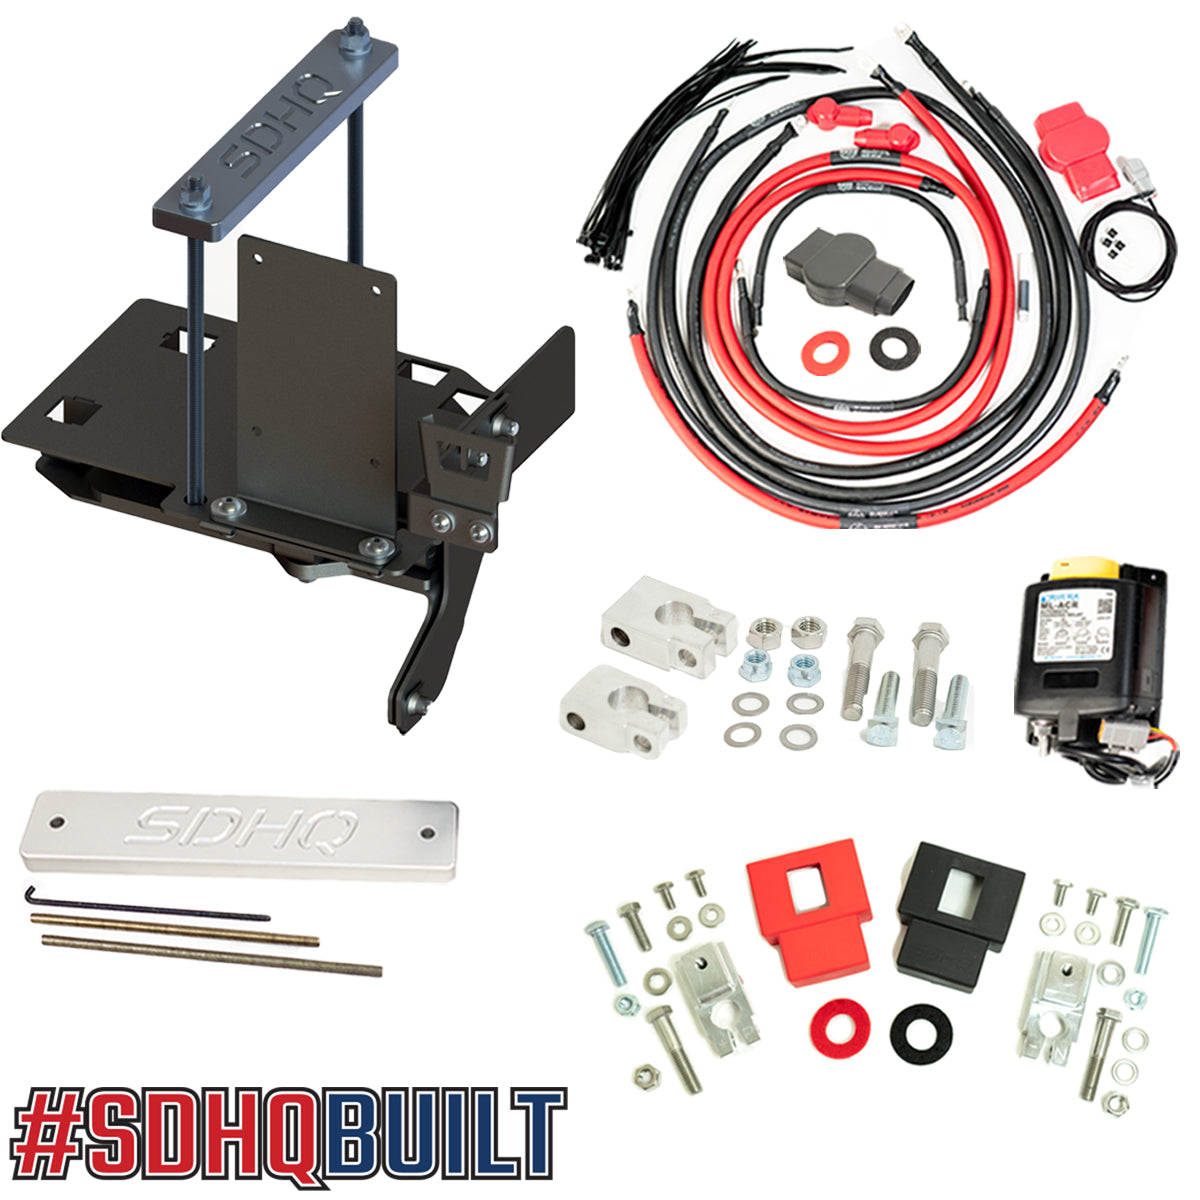 '07-21 Toyota Tundra SDHQ Built Complete Dual Battery Kit parts